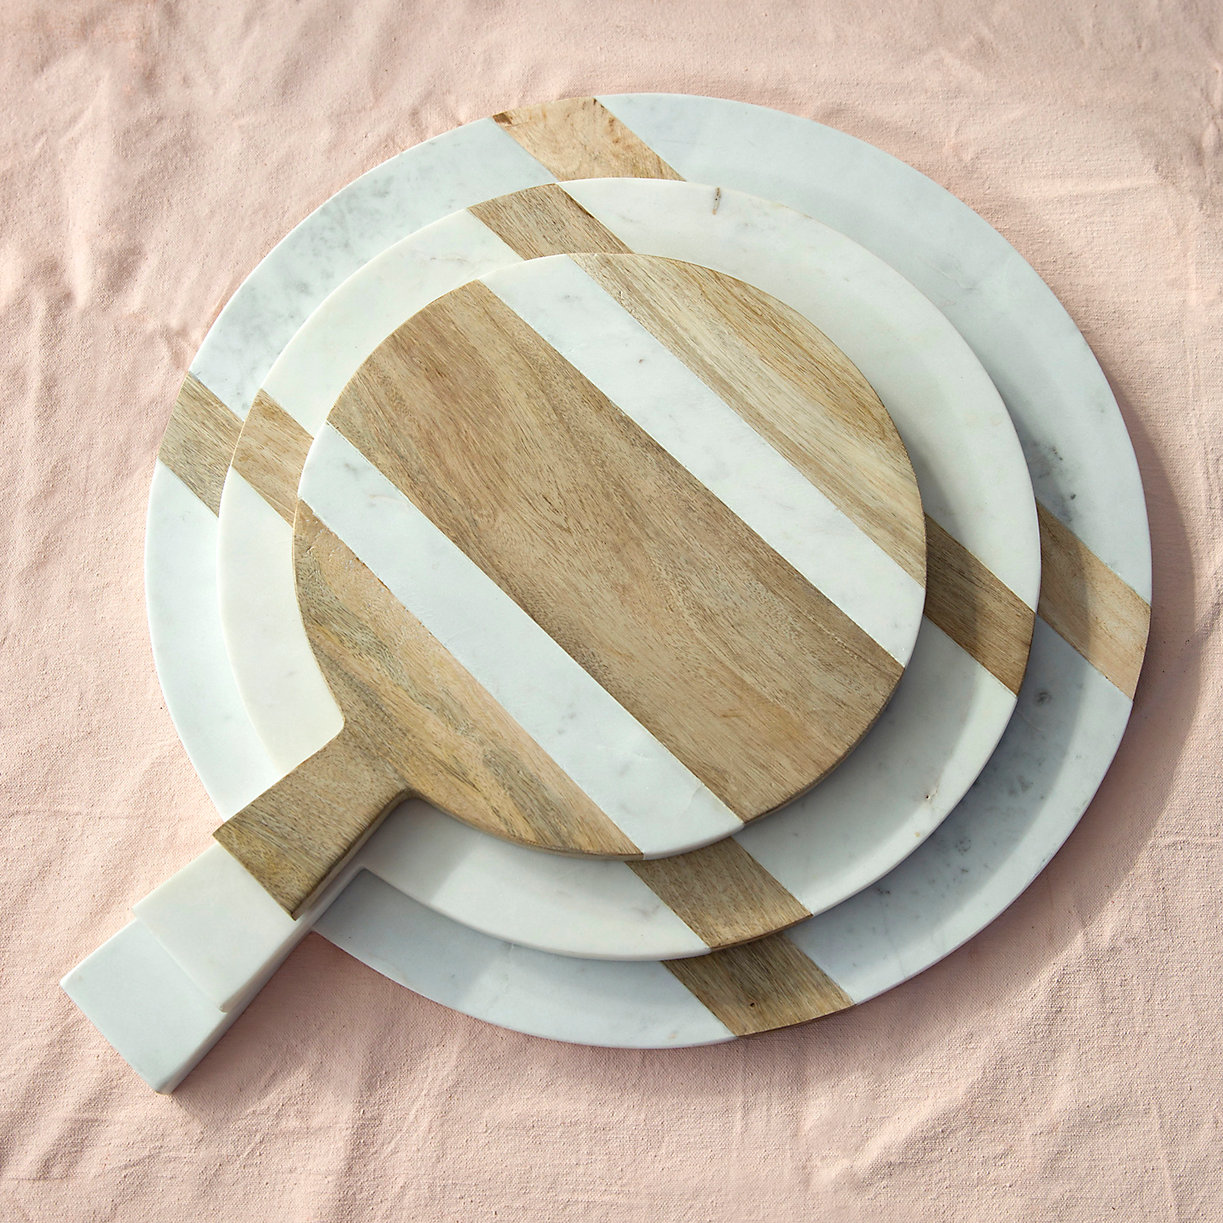 marble-and-wood-serving-board